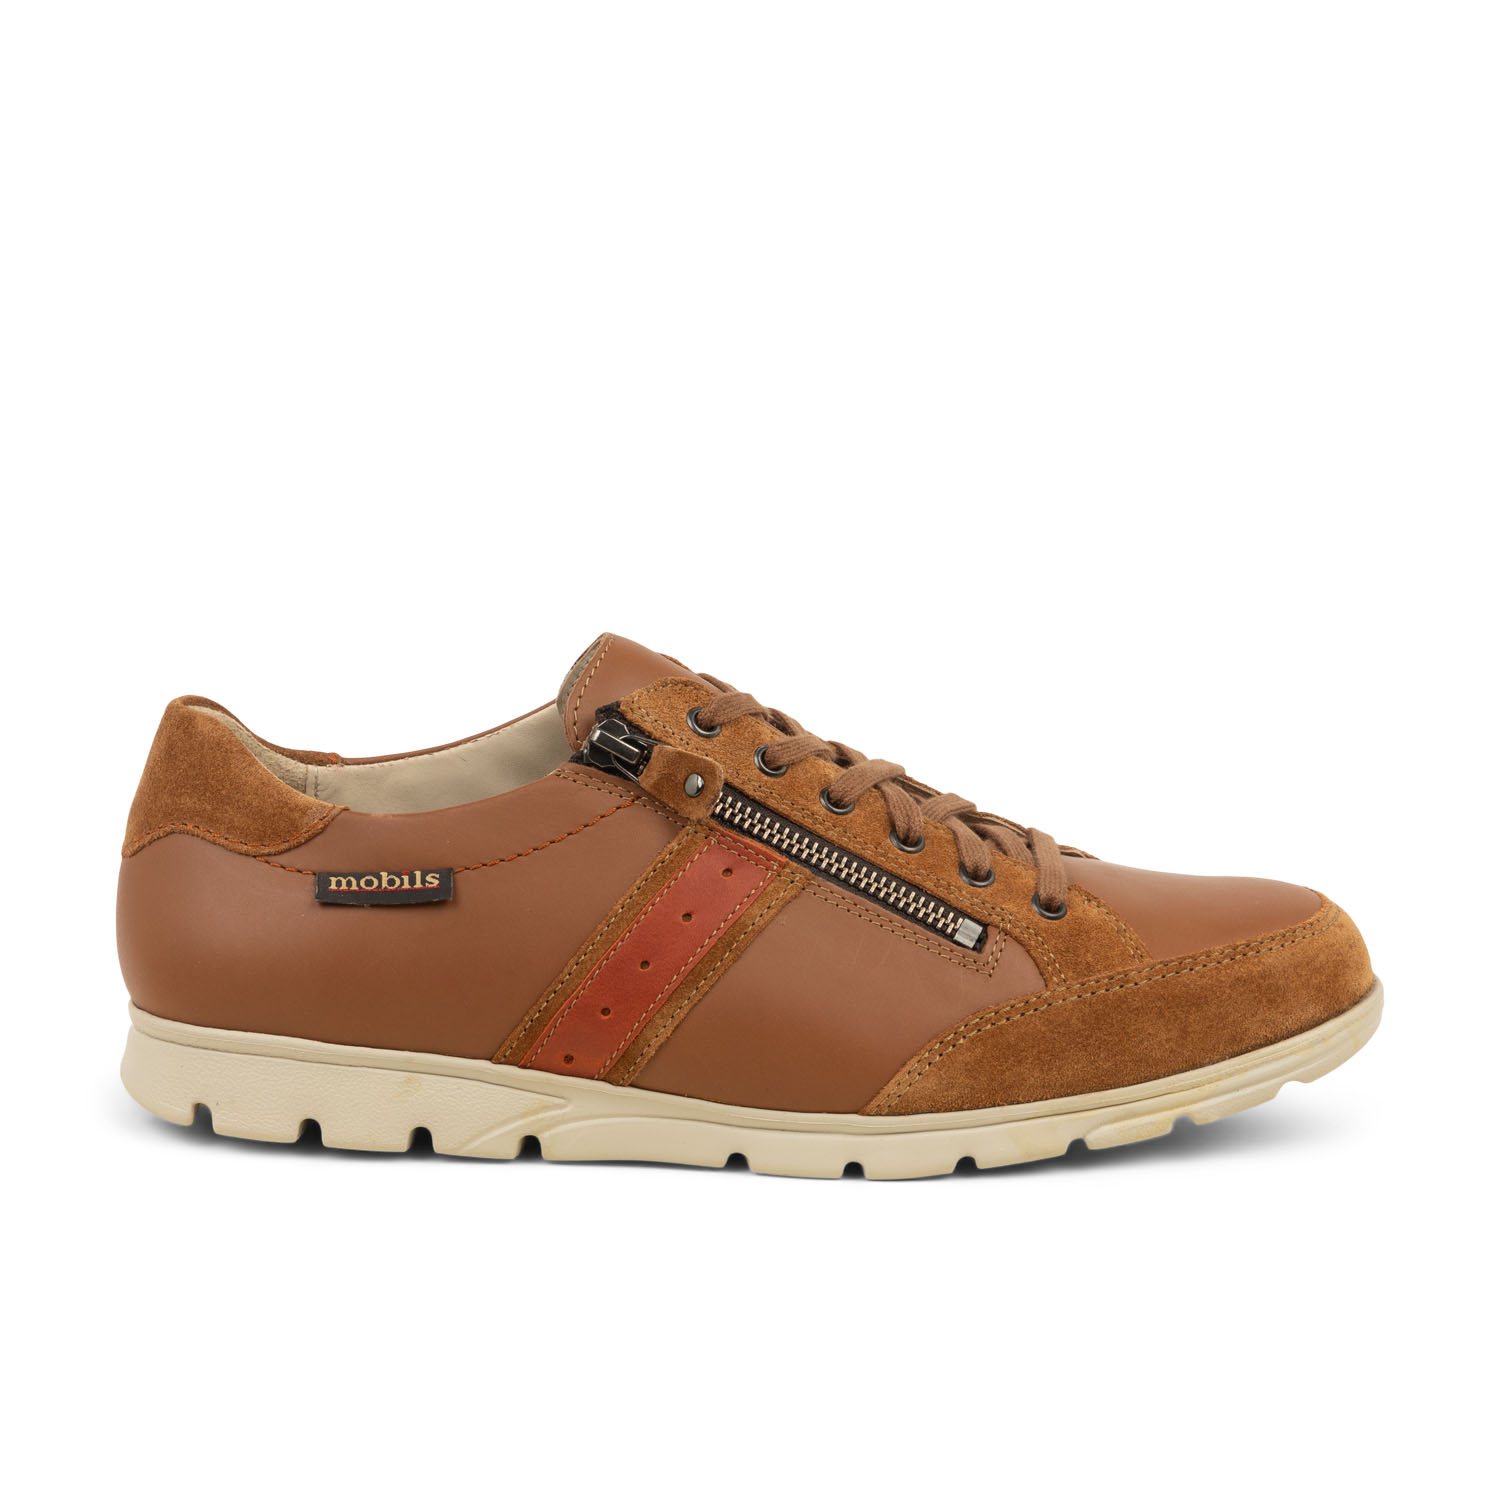 01 - KRISTOF - MEPHISTO - Chaussures à lacets - Cuir